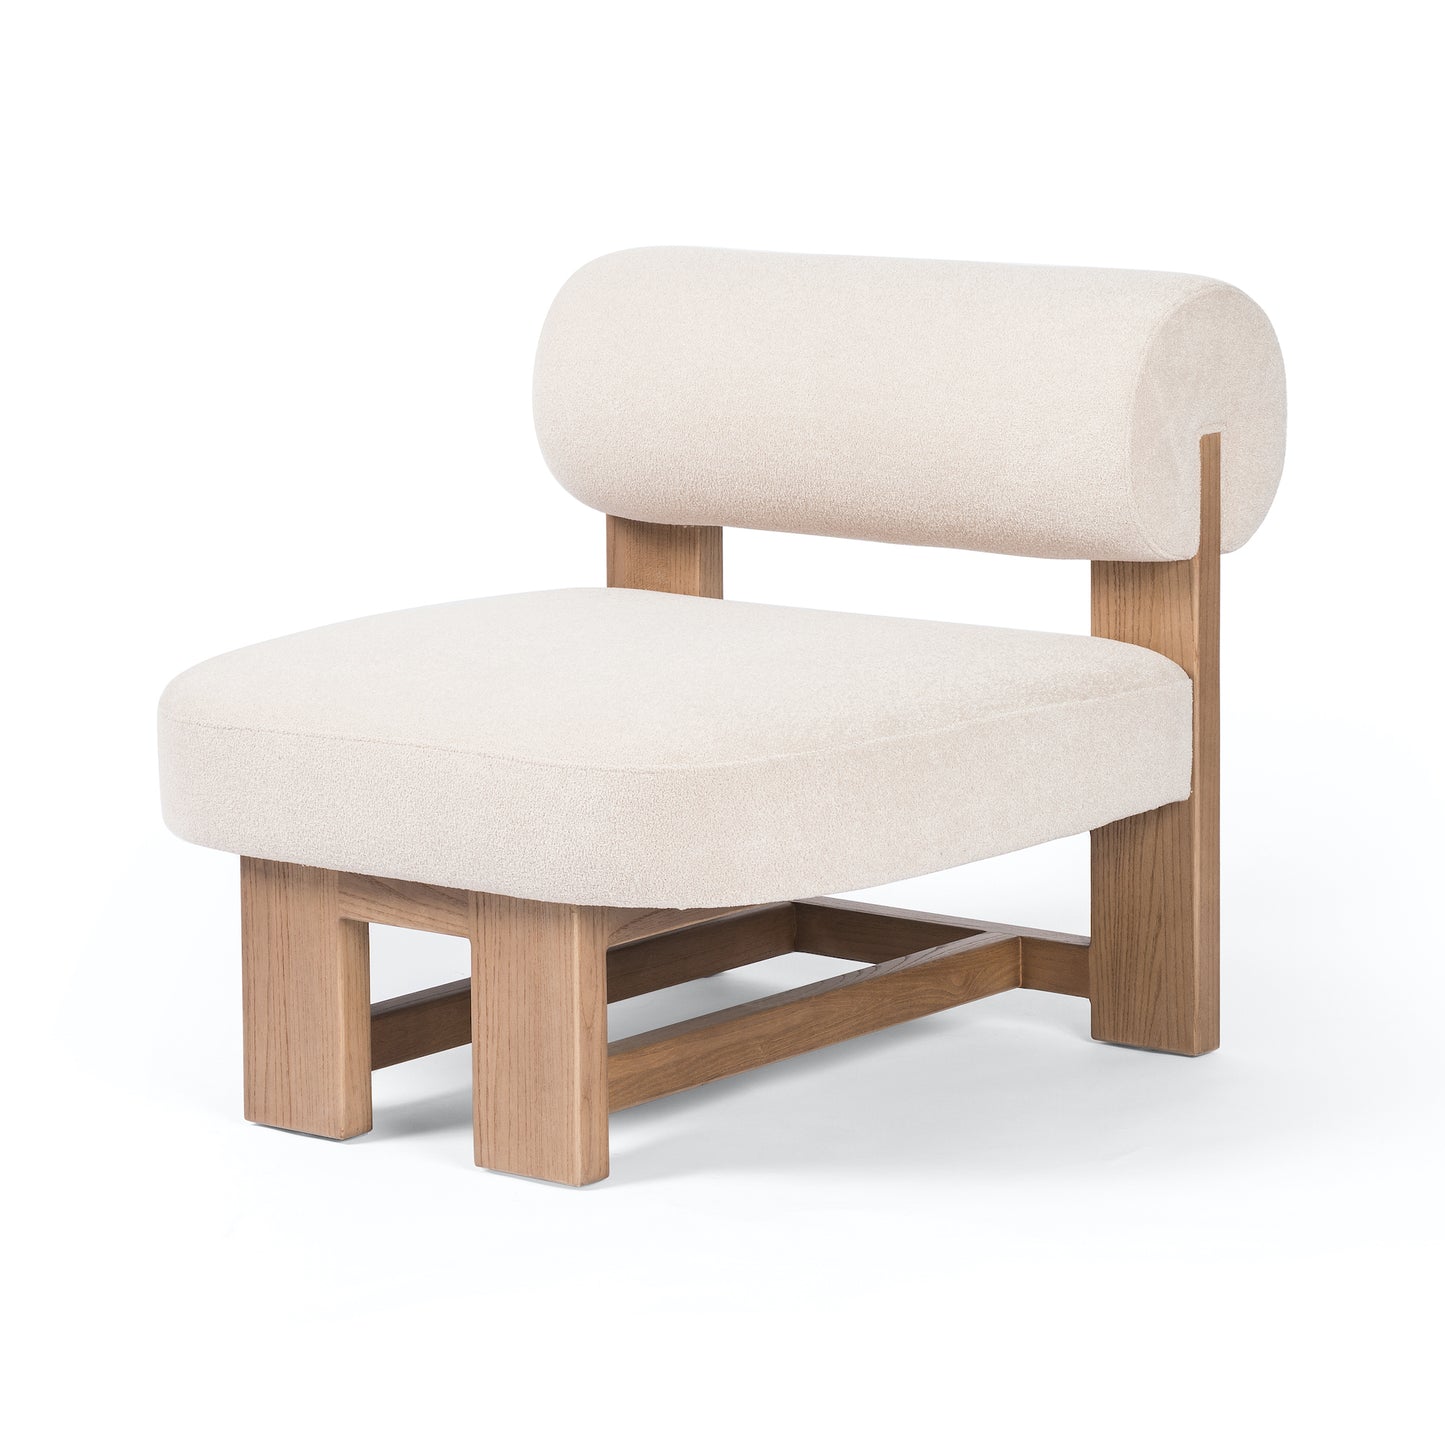 Oyster spa chair